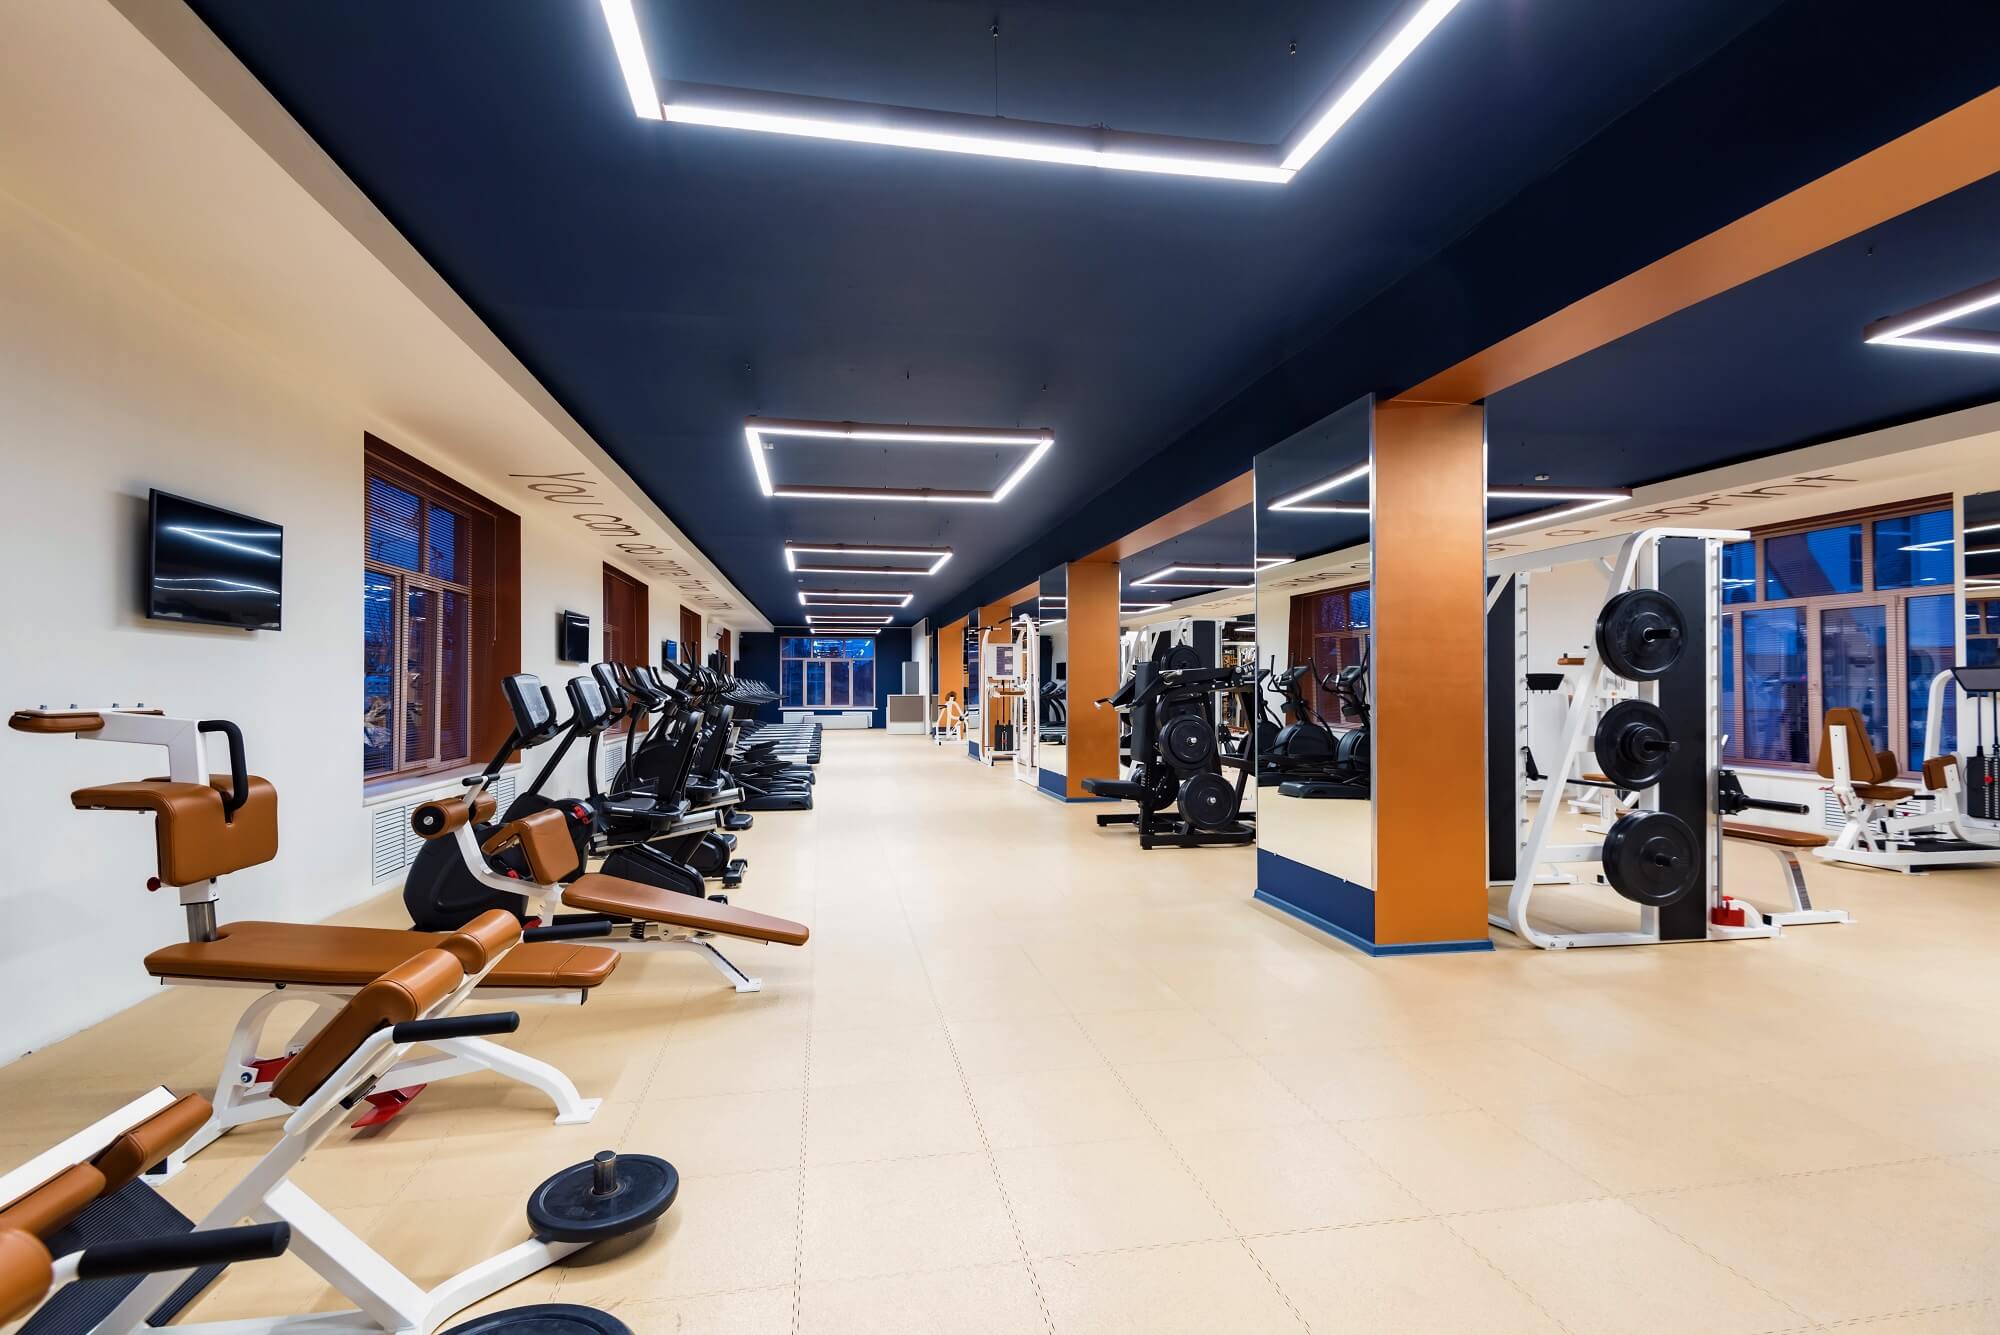 Interior with several modern fitness machines in gym